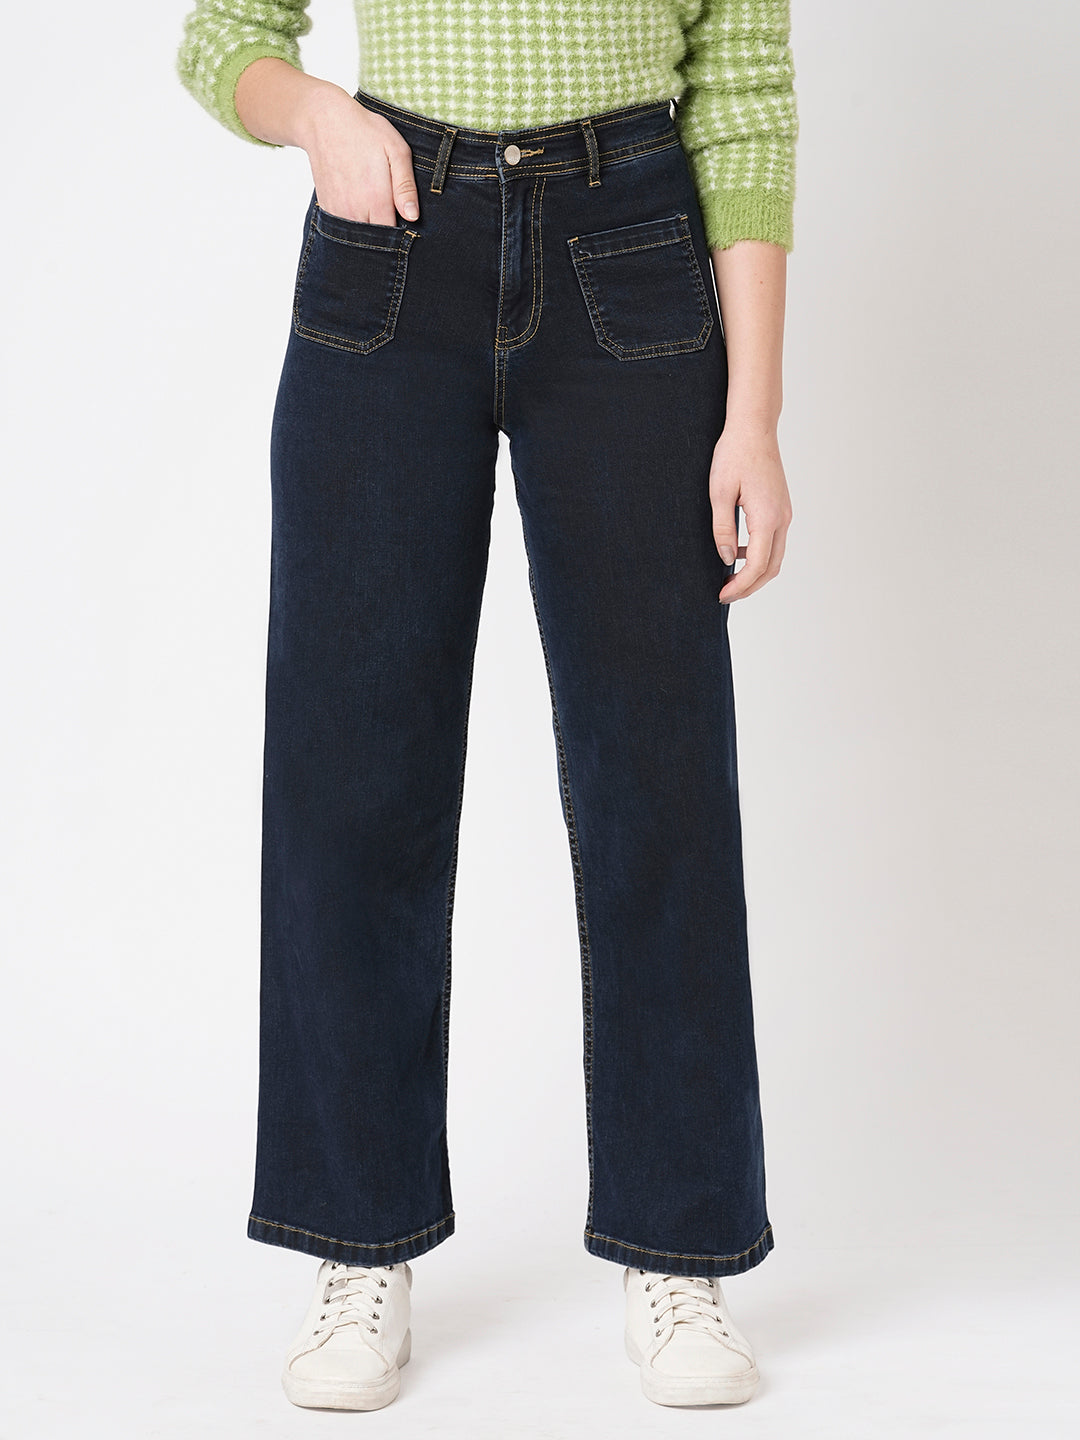 Buy KRAUS Mom Fit Ankle Length Cotton Womens Jeans